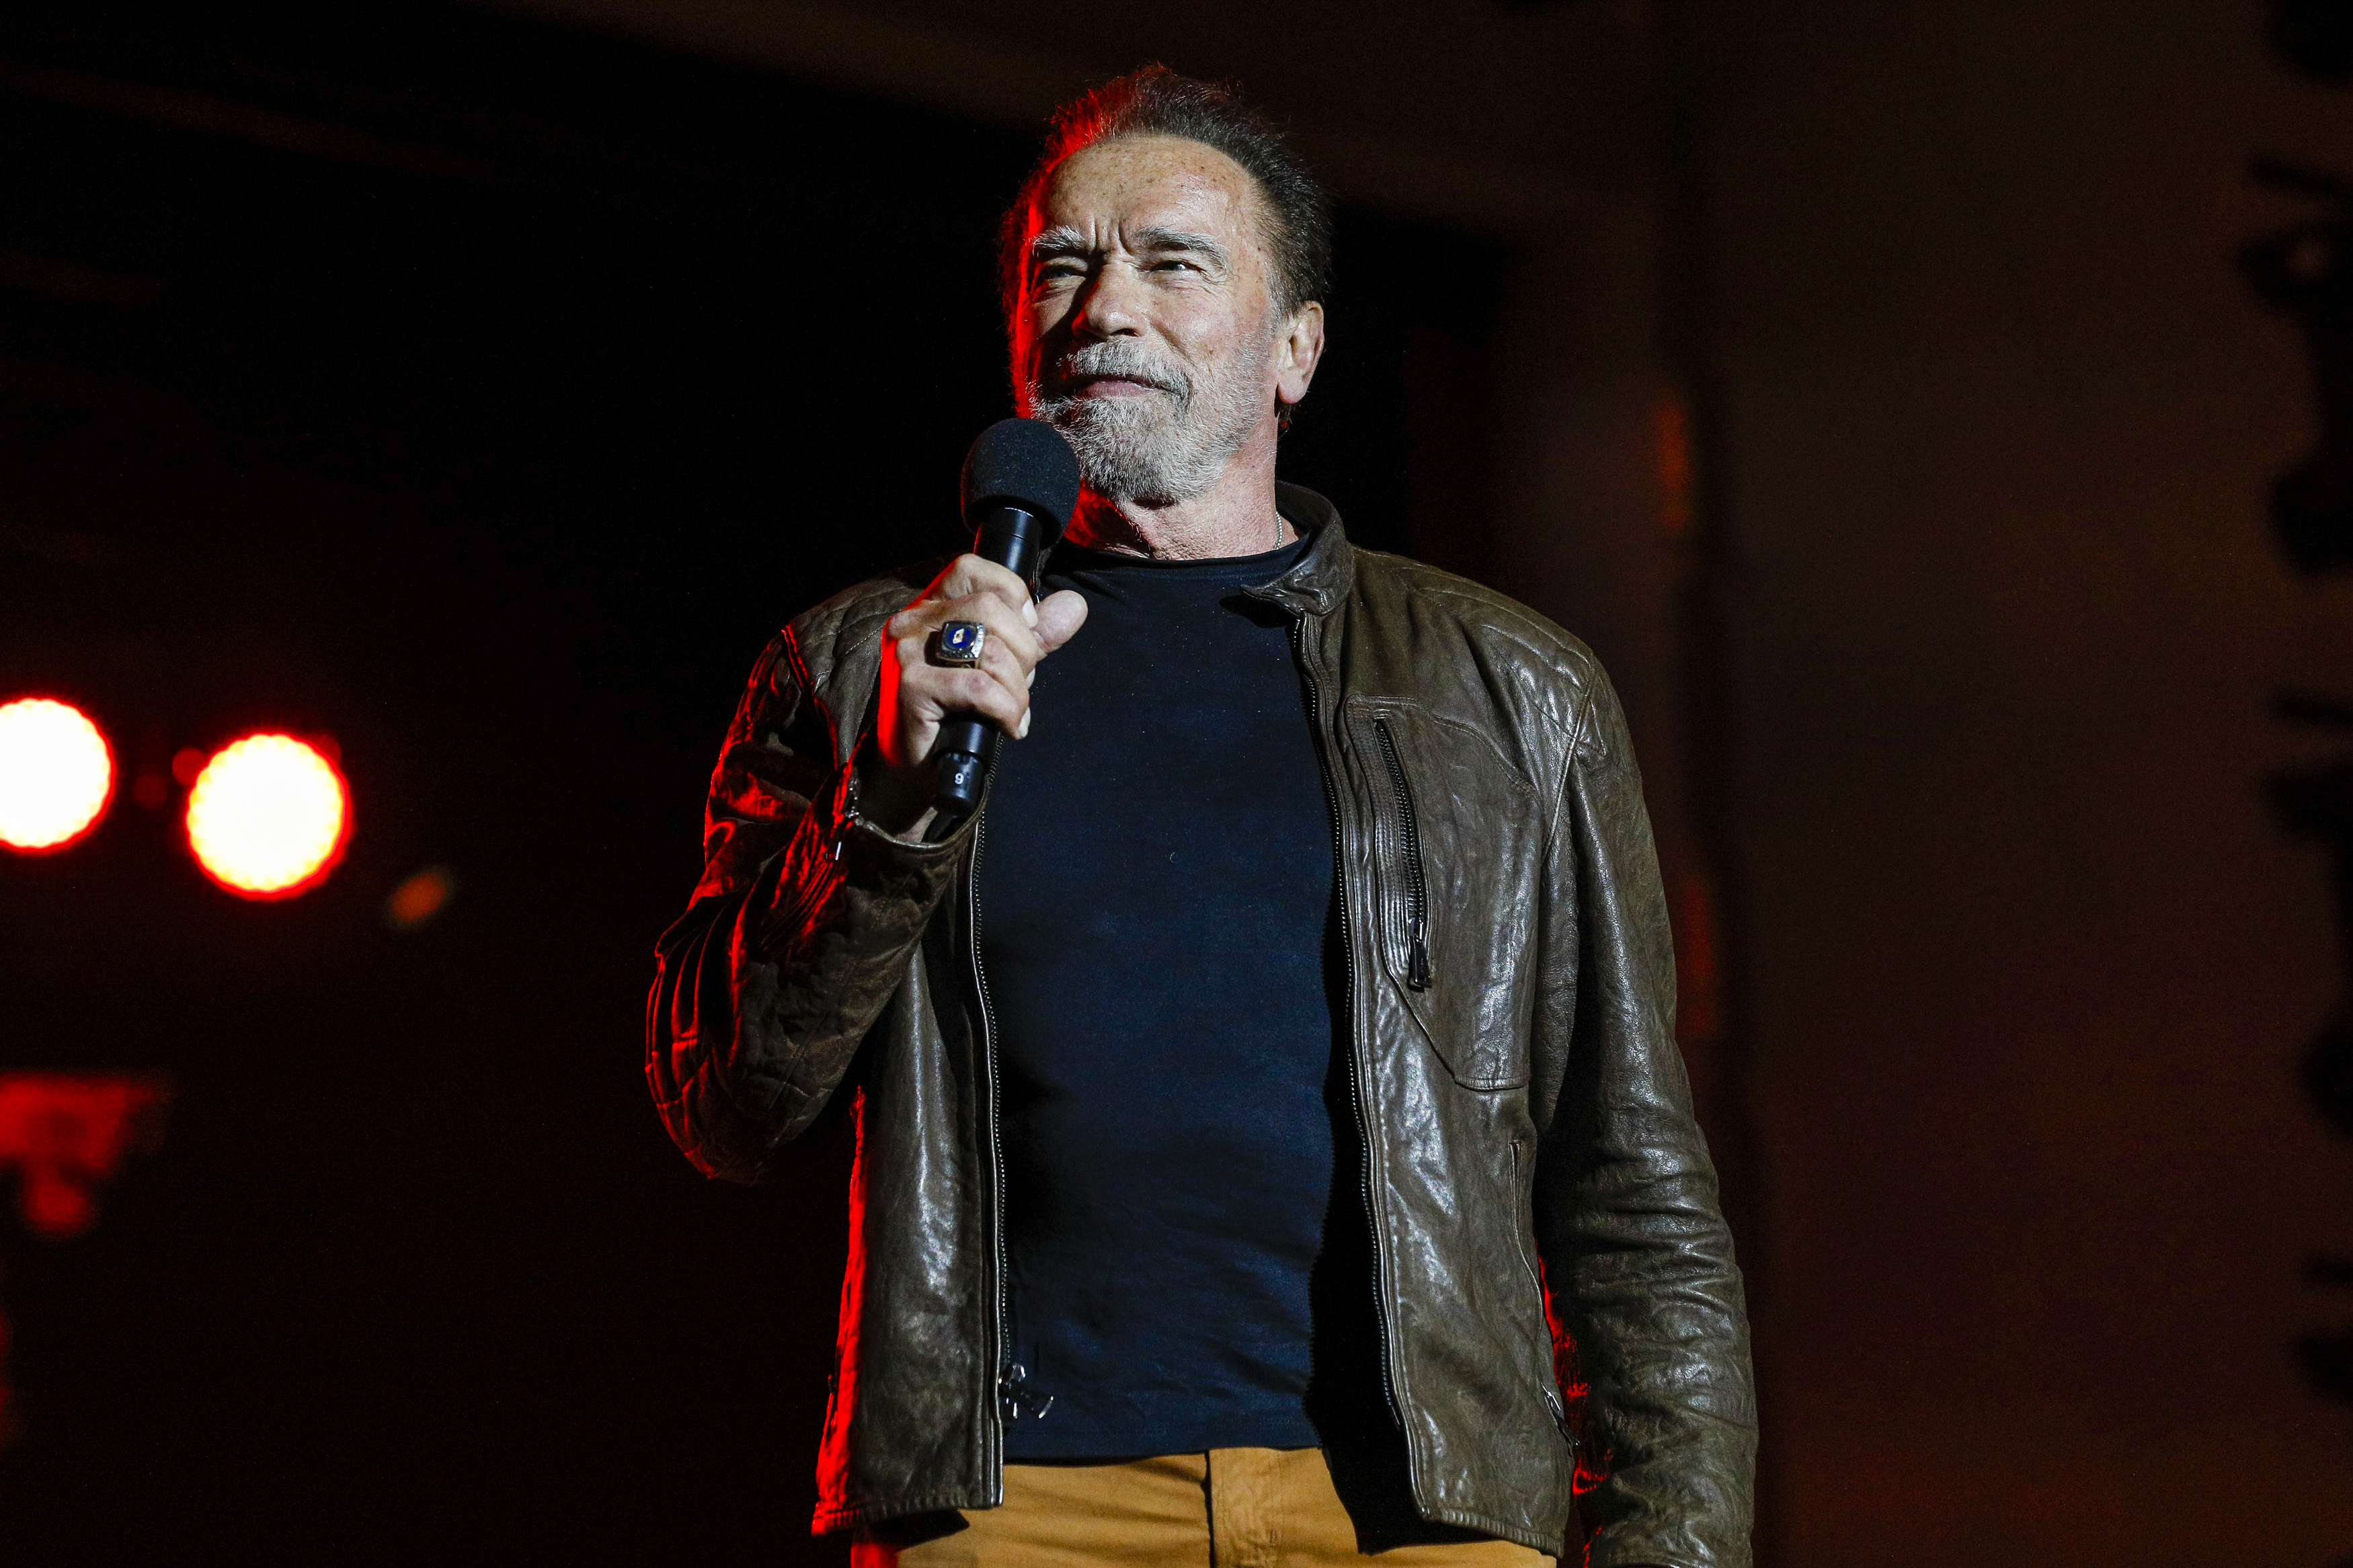 Arnold was at the Netflix presentation to announce the new season